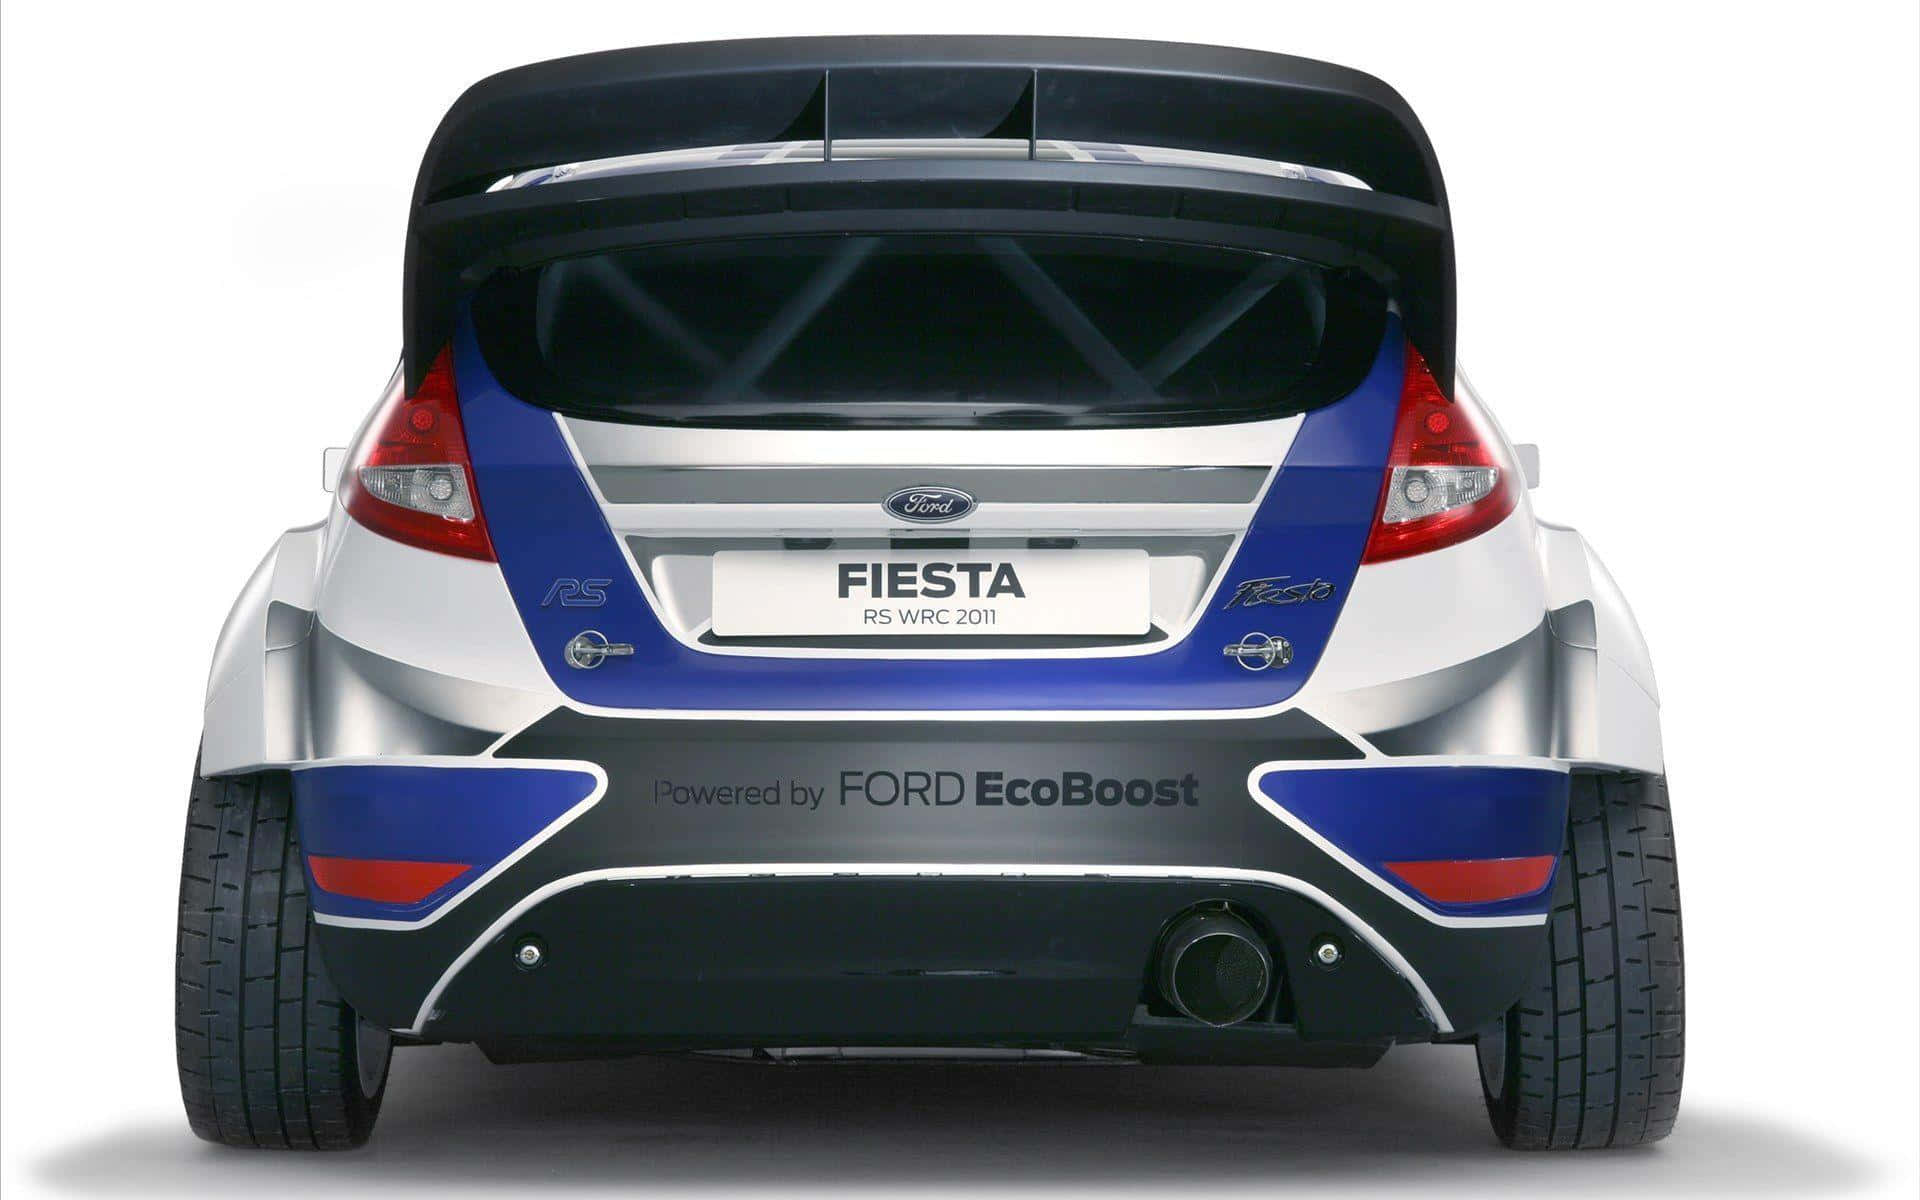 Captivating Ford Fiesta in Action Wallpaper